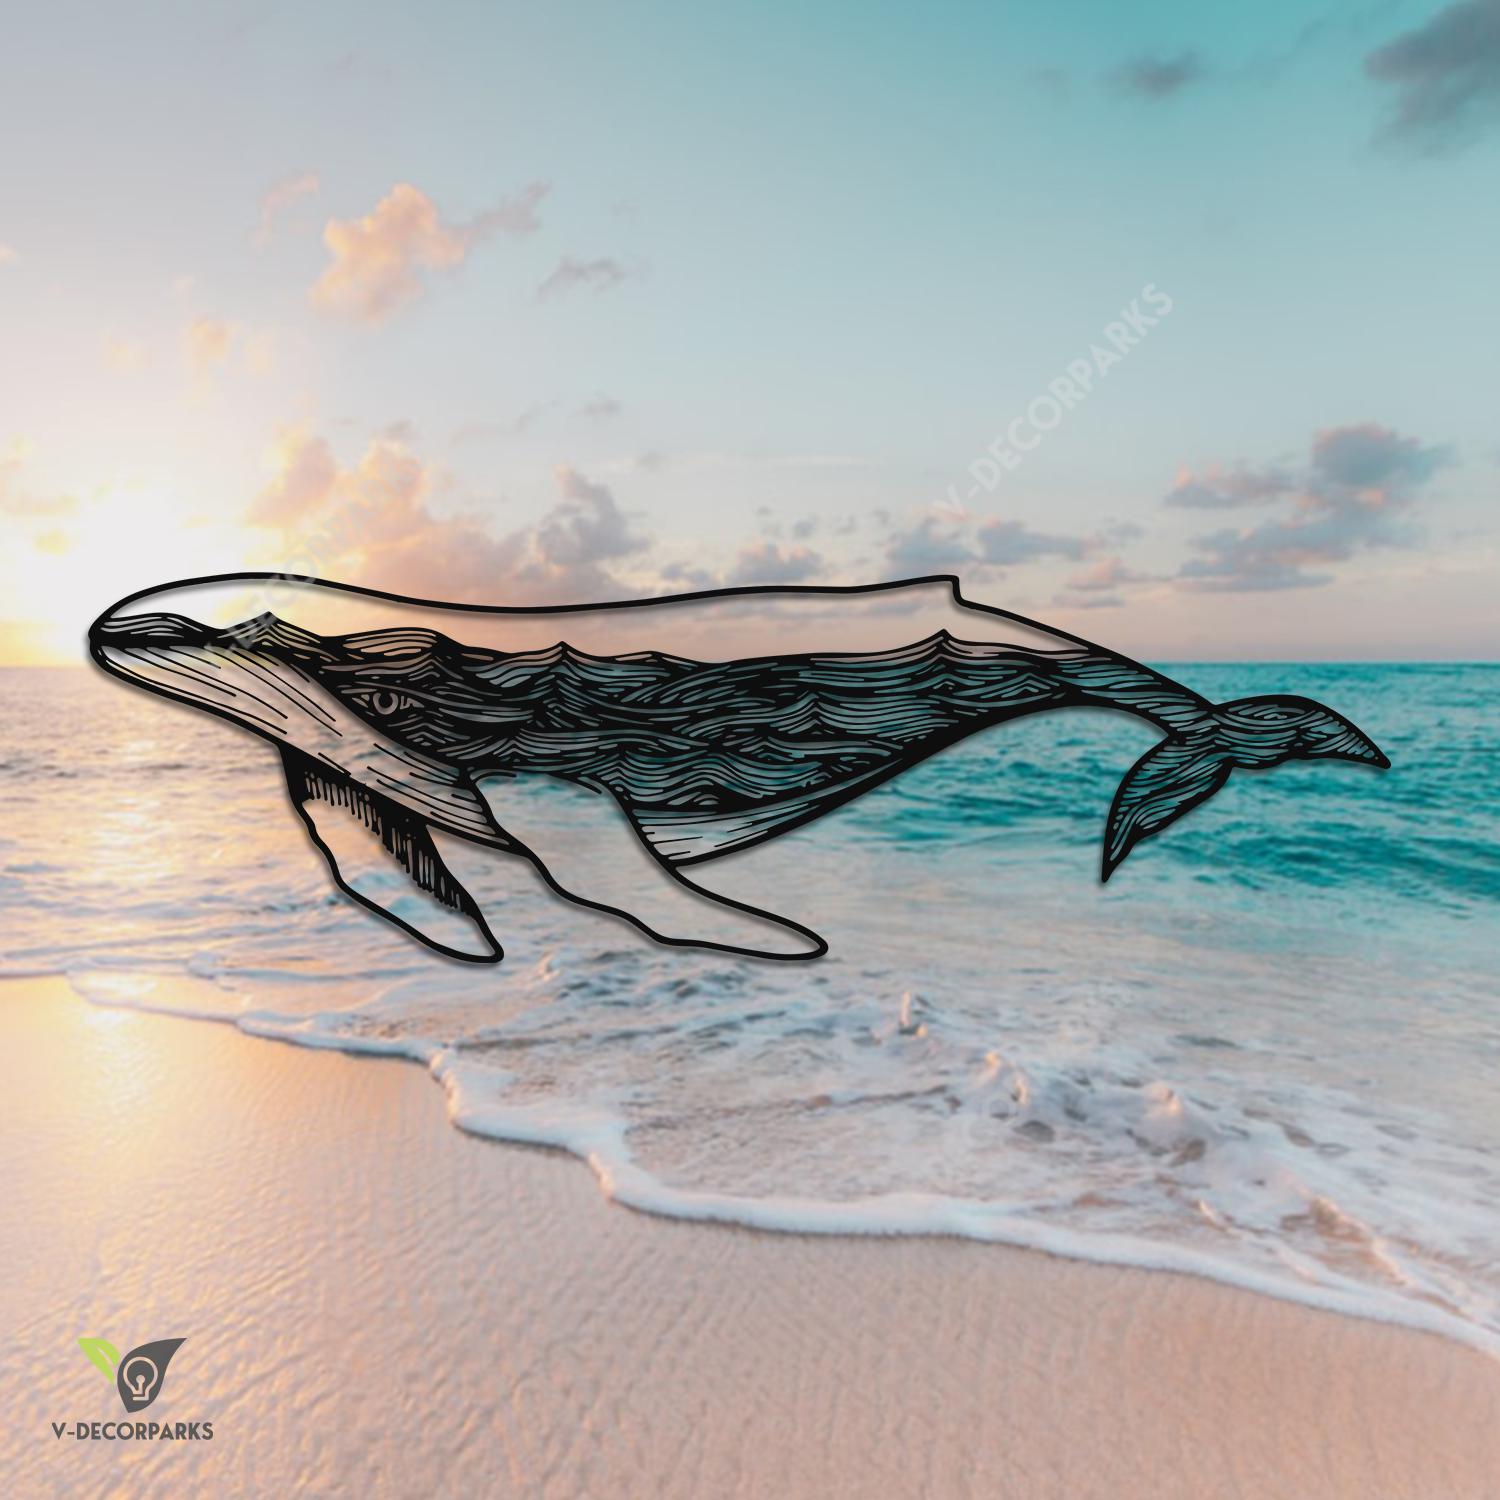 Humpback Whal With Ocean Wave Inside, Whale Cutout Artwork